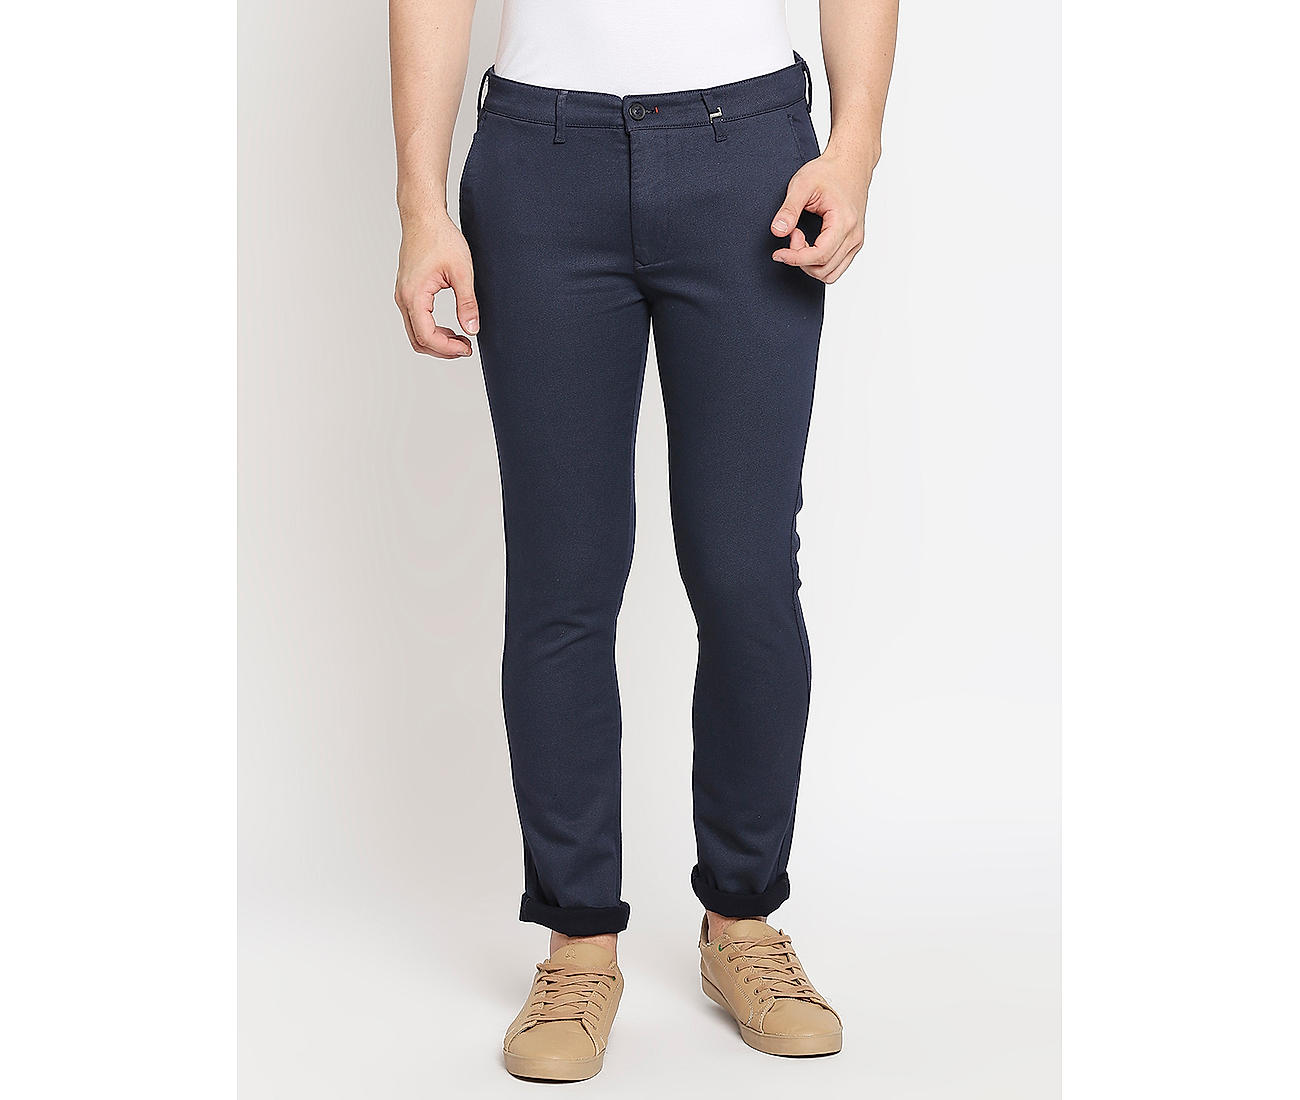 Casual Trousers  Buy branded Casual Trousers online cotton cotton blend  casual wear party wear Casual Trousers for Men at Limeroad